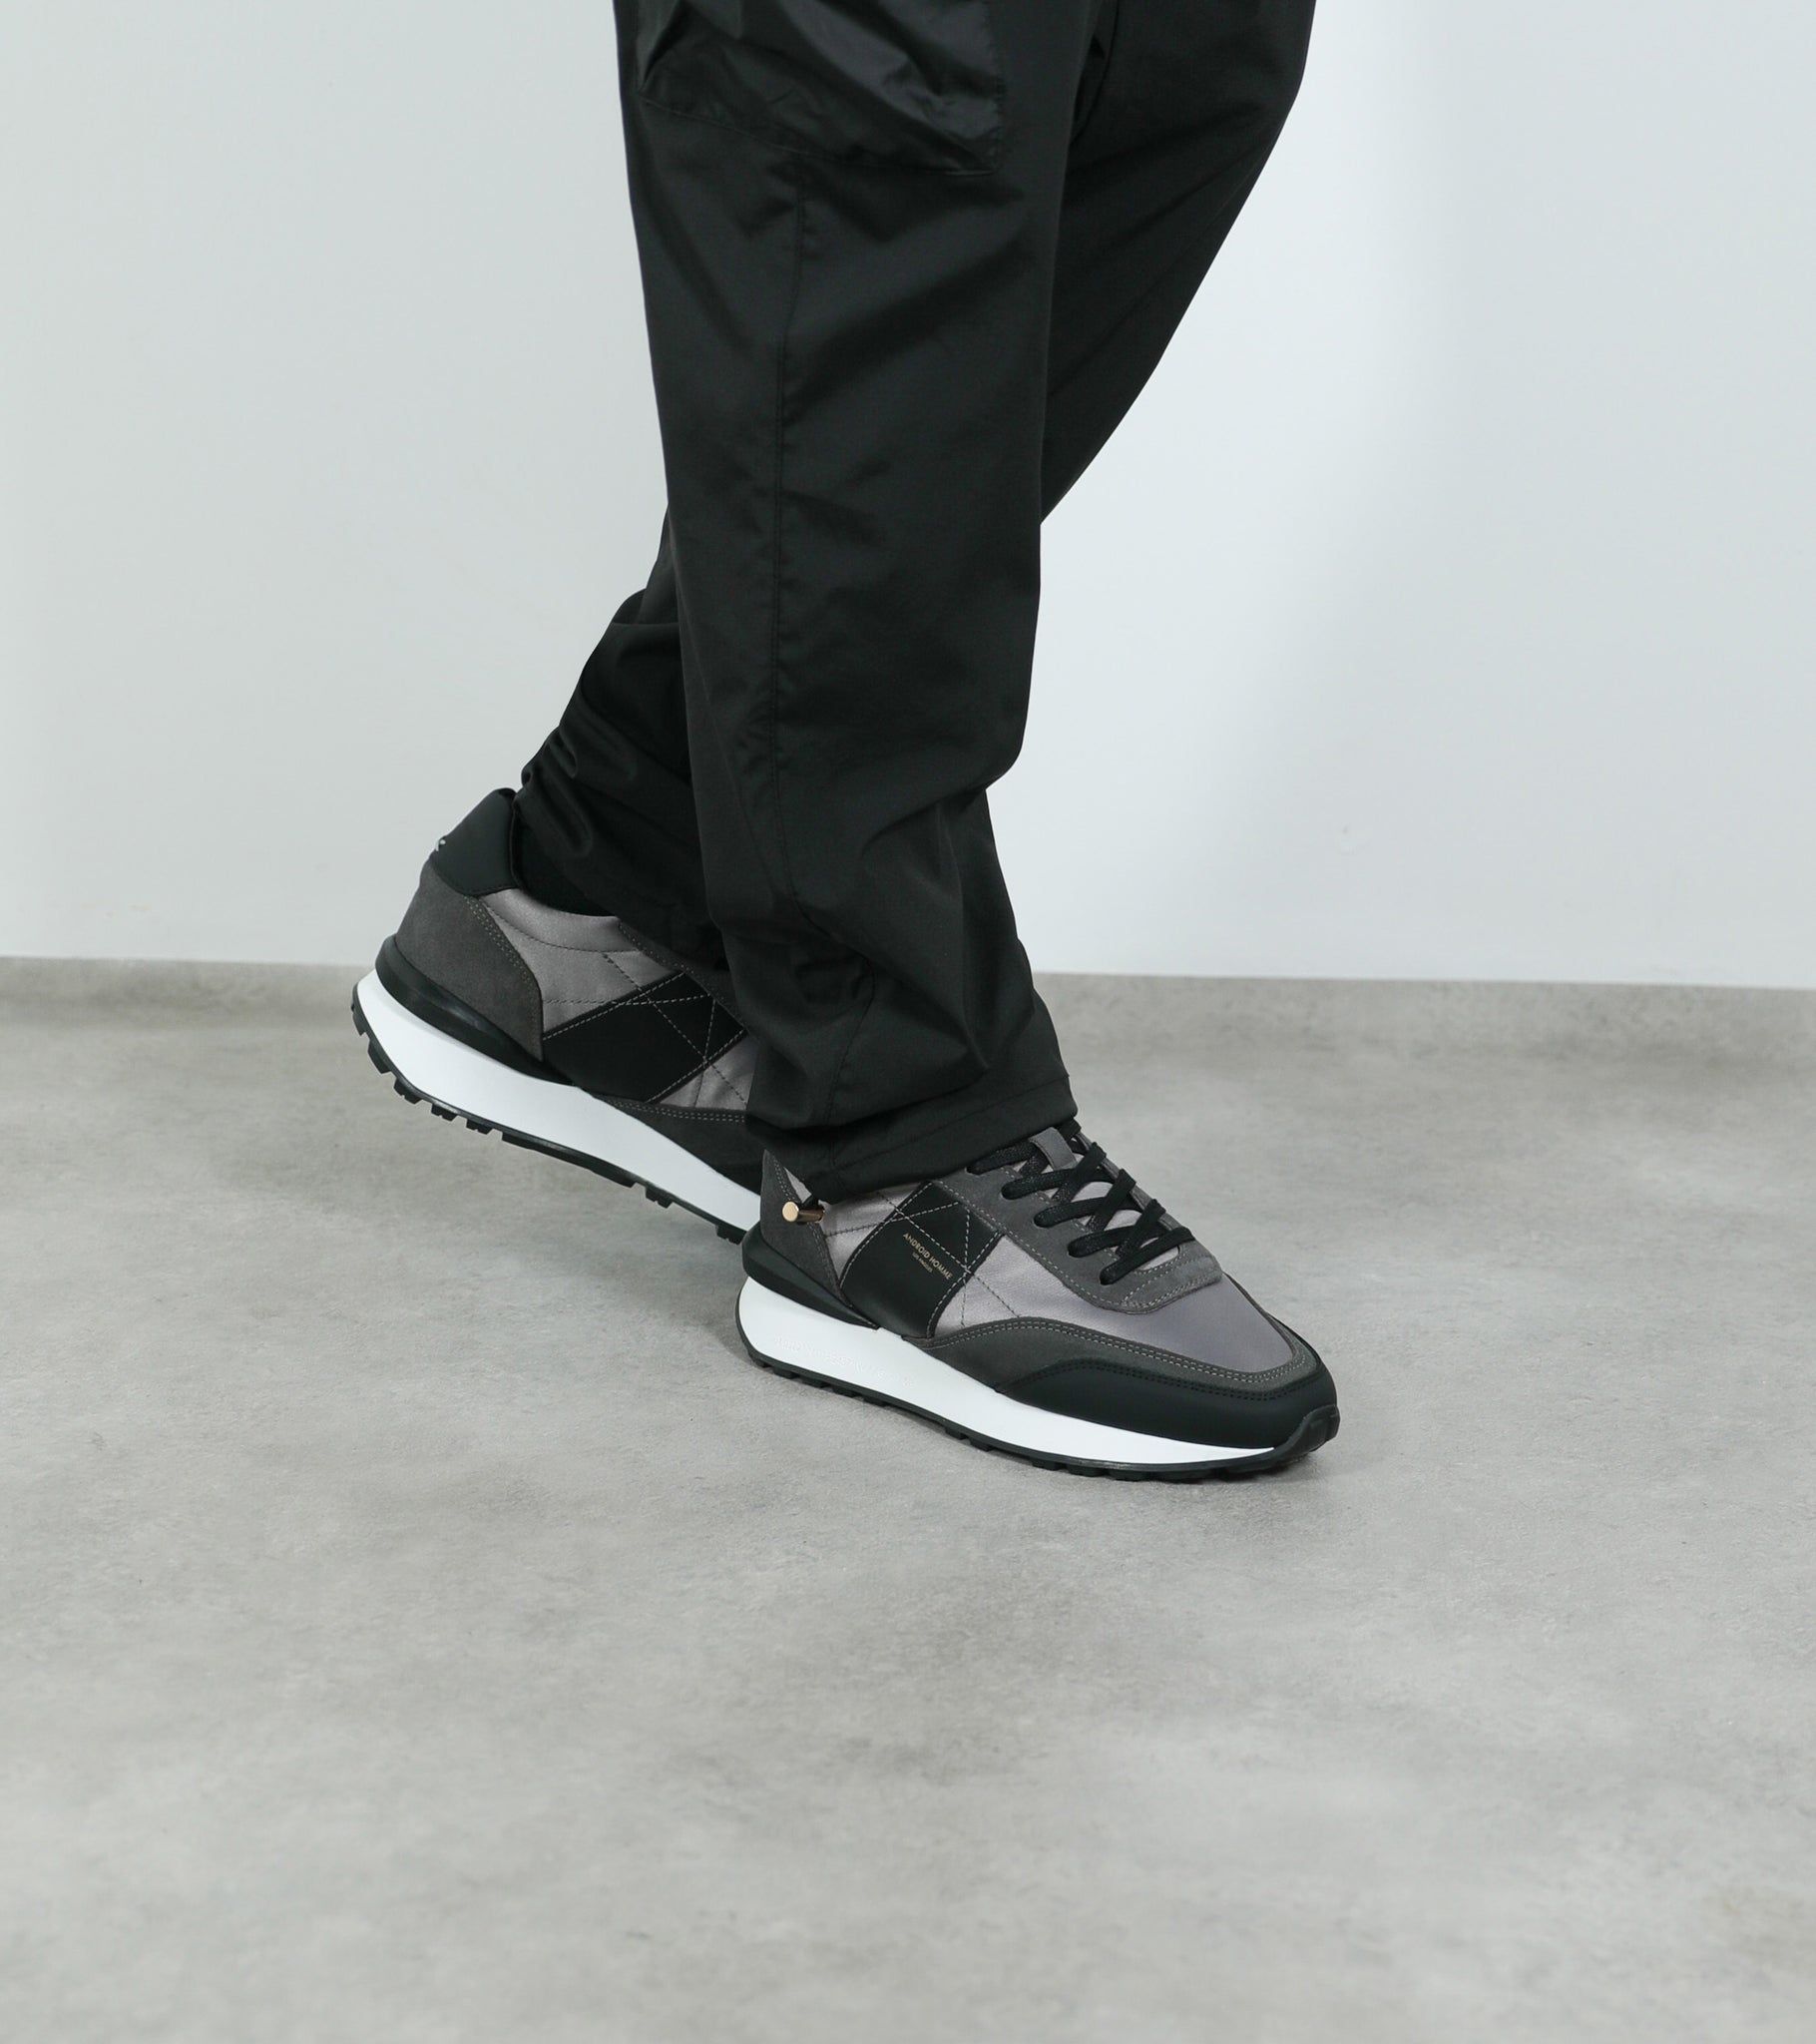 Ecom imagery of the Marina Del Rey Grey Nylon Black Suede Android Homme Trainers on foot.